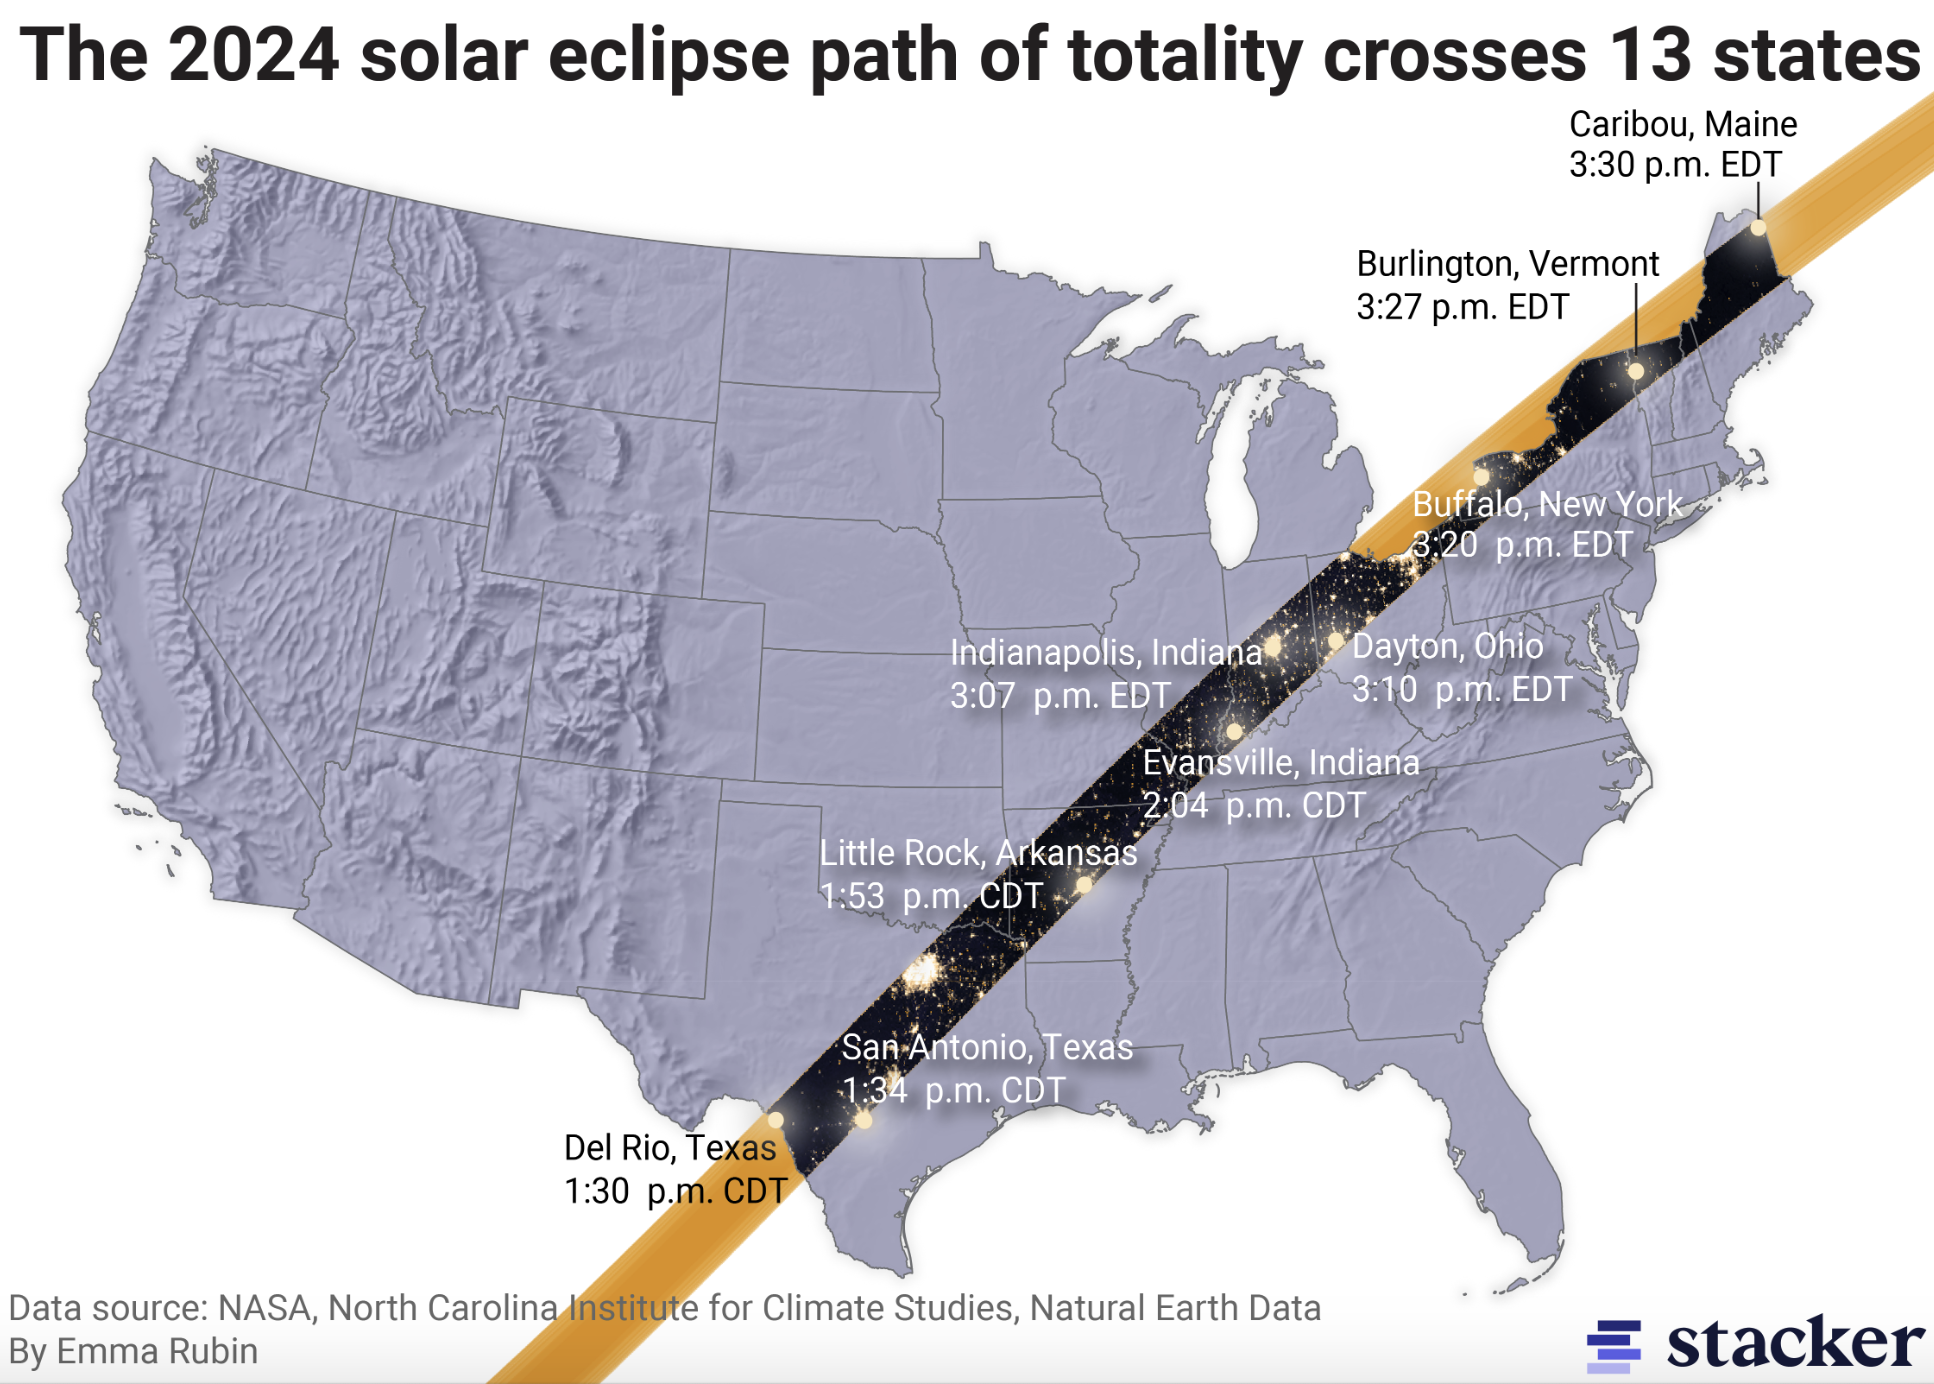 Map showing the path of totality across the U.S., passing through 13 states.